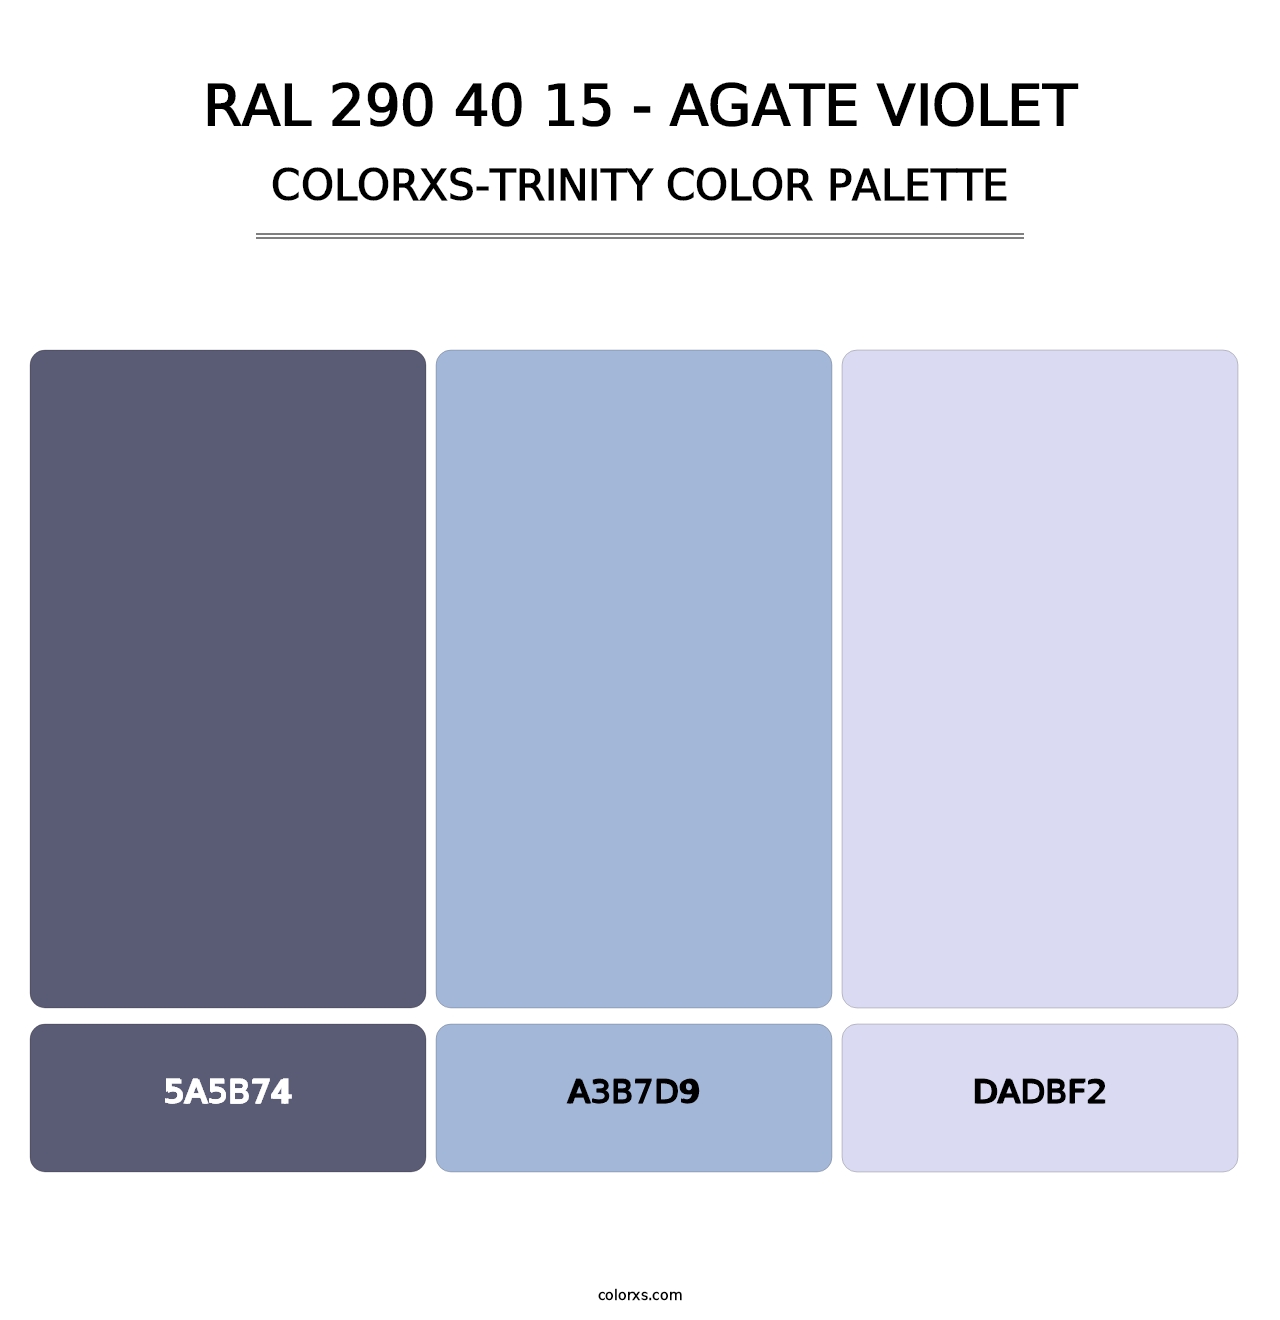 RAL 290 40 15 - Agate Violet - Colorxs Trinity Palette